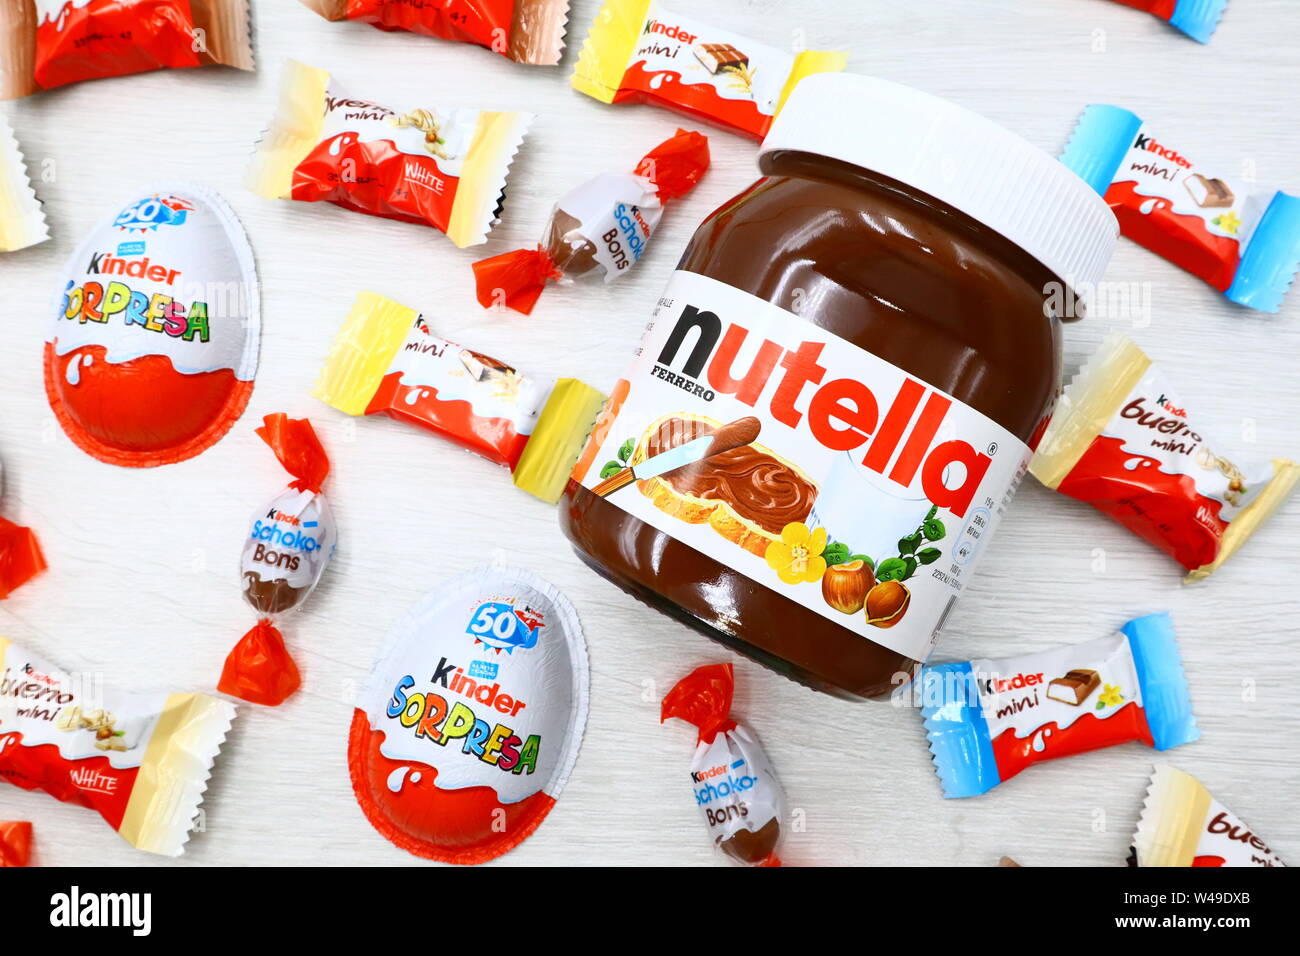 Nutella, Kinder Surprise and Kinder Chocolates made in Italy by Ferrero  Stock Photo - Alamy